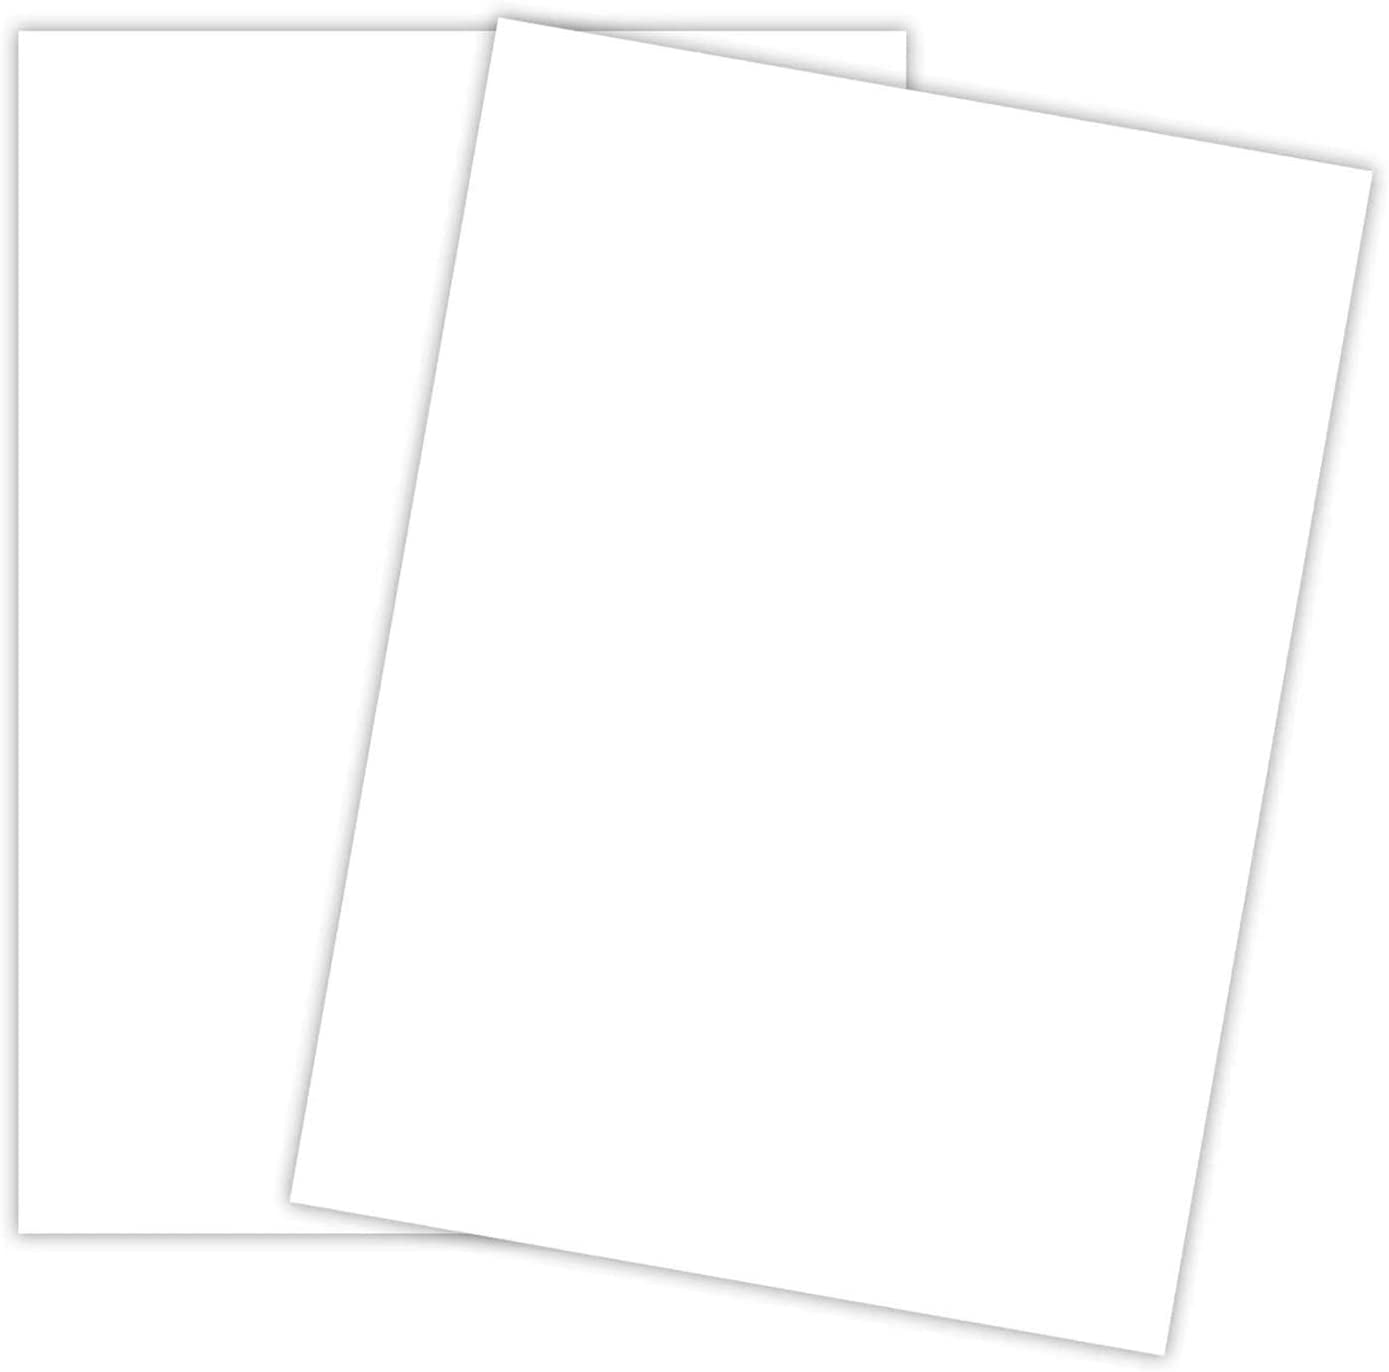 500 Sheets Total 65 lb/176 gsm Neenah Bright White Cardstock 96 Brightness 8.5 x 11 Bright White Sold as 2 Pack 